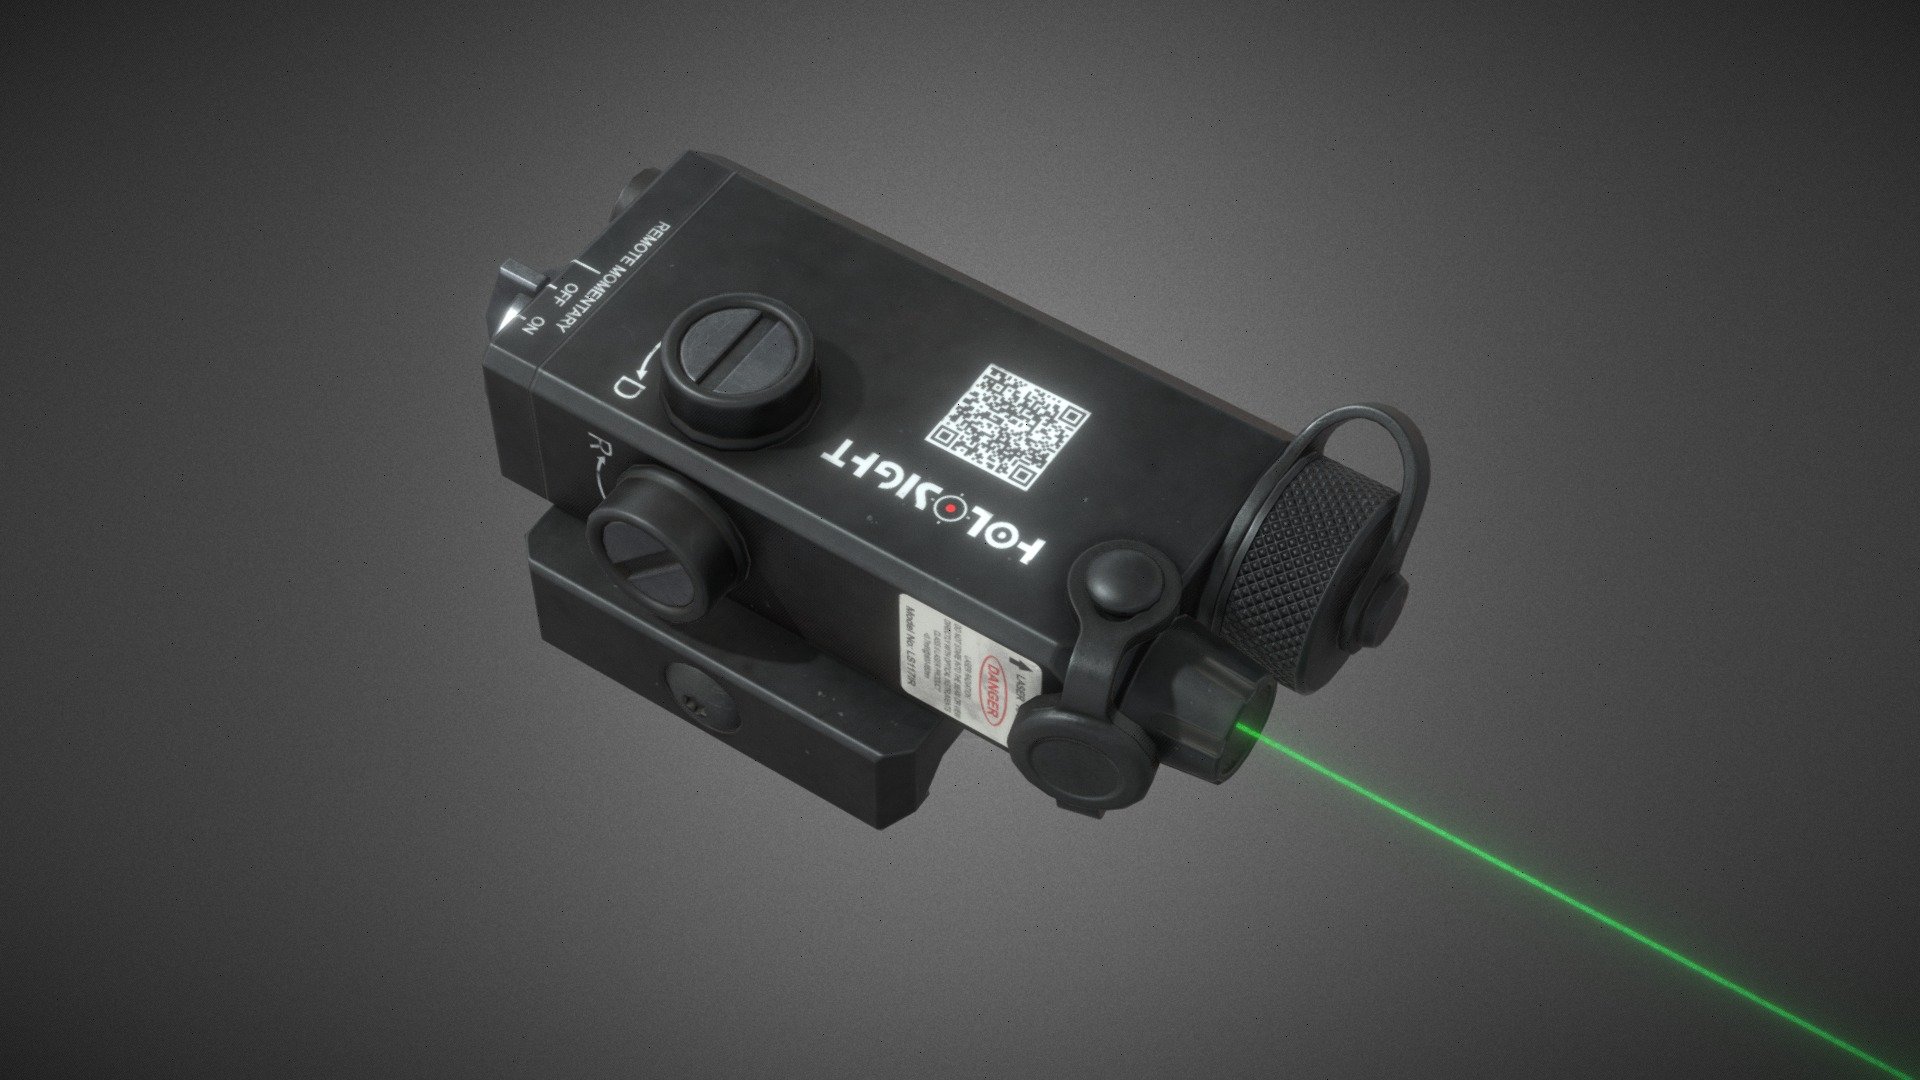 Holosight Aim Laser Sight PBR

Created for Picatinny NATO Rail.

Low-poly model for your projects.

Triangles: 6.1k Vertices: 3.2k

The size of the 3D model corresponds to the actual size of the laser sight.

Game ready asset:

•    Maps (Albedo, Normal, Metallic, Roughness, AO);

•    Resolution: one PBR material 4096x4096 (we can easily compress this one via photoshop)

•    Little wear and tear

•    Laser beam added as a separate mesh

•    Included 3D formats: fbx, obj, dae

Model renders: https://www.artstation.com/artwork/Wmwb02 - Holosight Aim Laser Sight PBR - Buy Royalty Free 3D model by Oleg Anufriev (Naches) (@olgnchsart) 3d model